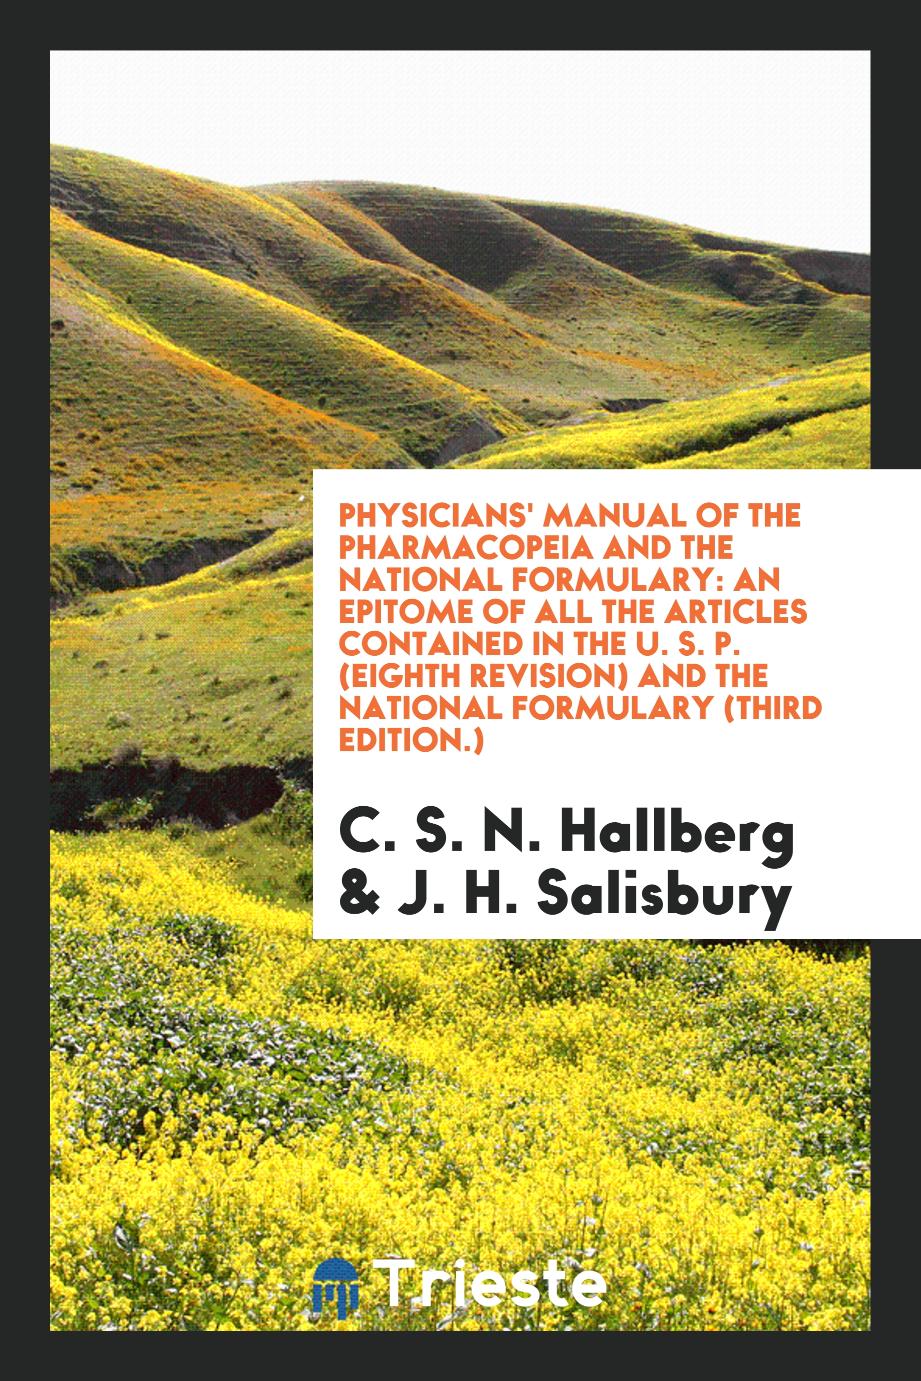 Physicians' Manual of the Pharmacopeia and the National Formulary: An Epitome of All the Articles Contained in the U. S. P. (Eighth Revision) and the National Formulary (Third Edition.)